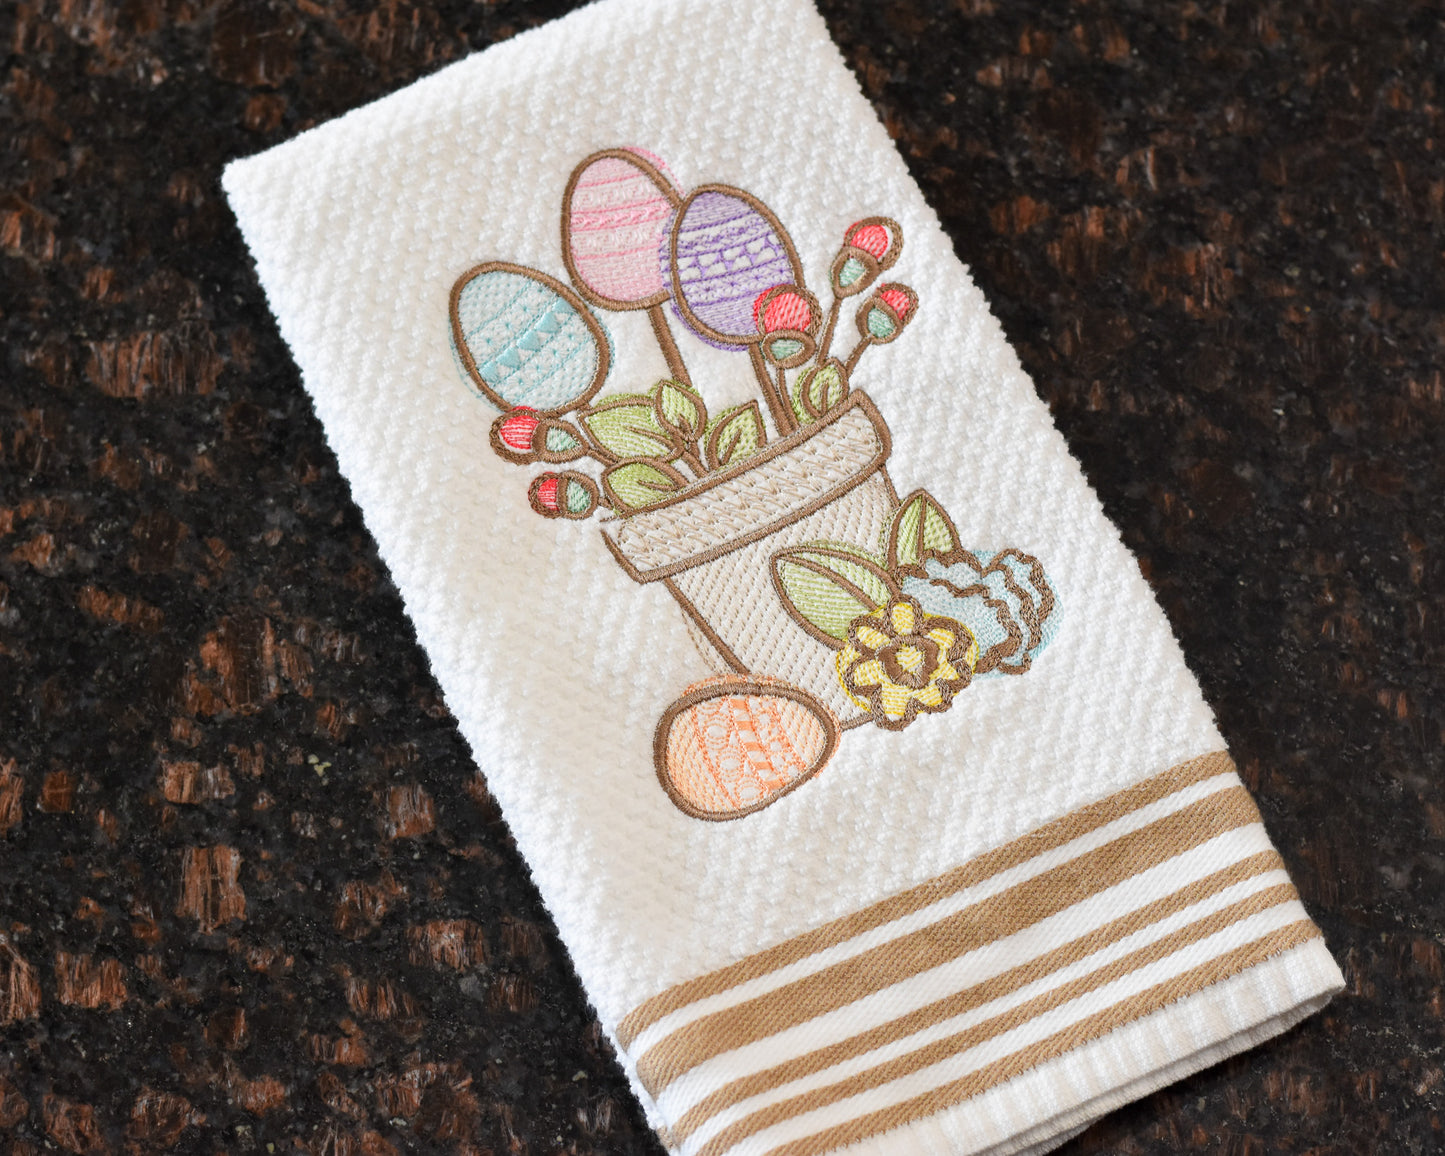 Spring Floral Easter Potted Plant Embroidered Towel